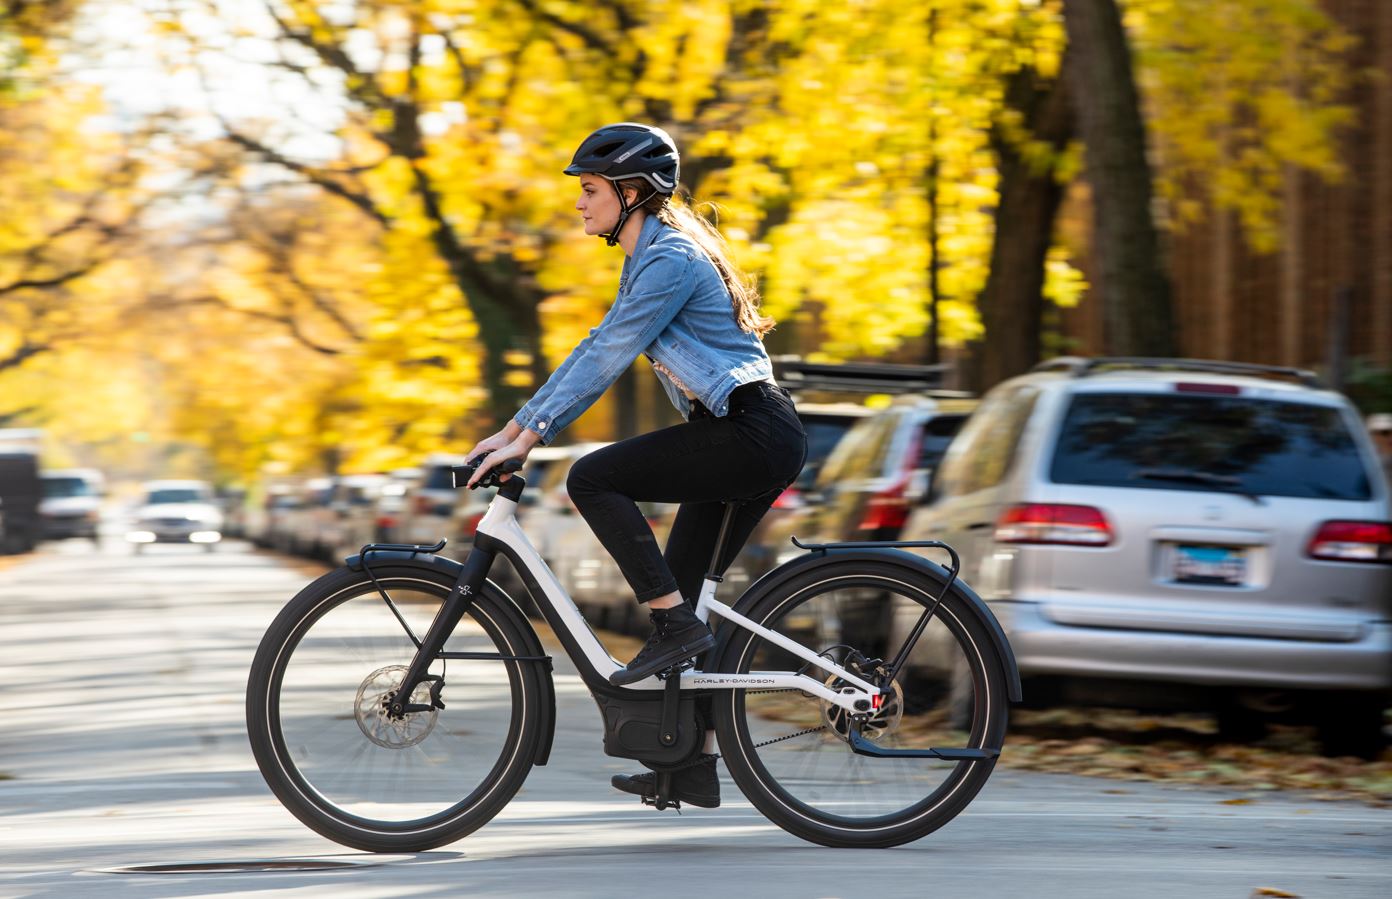 Car brands in the electric bike biz what comes next?